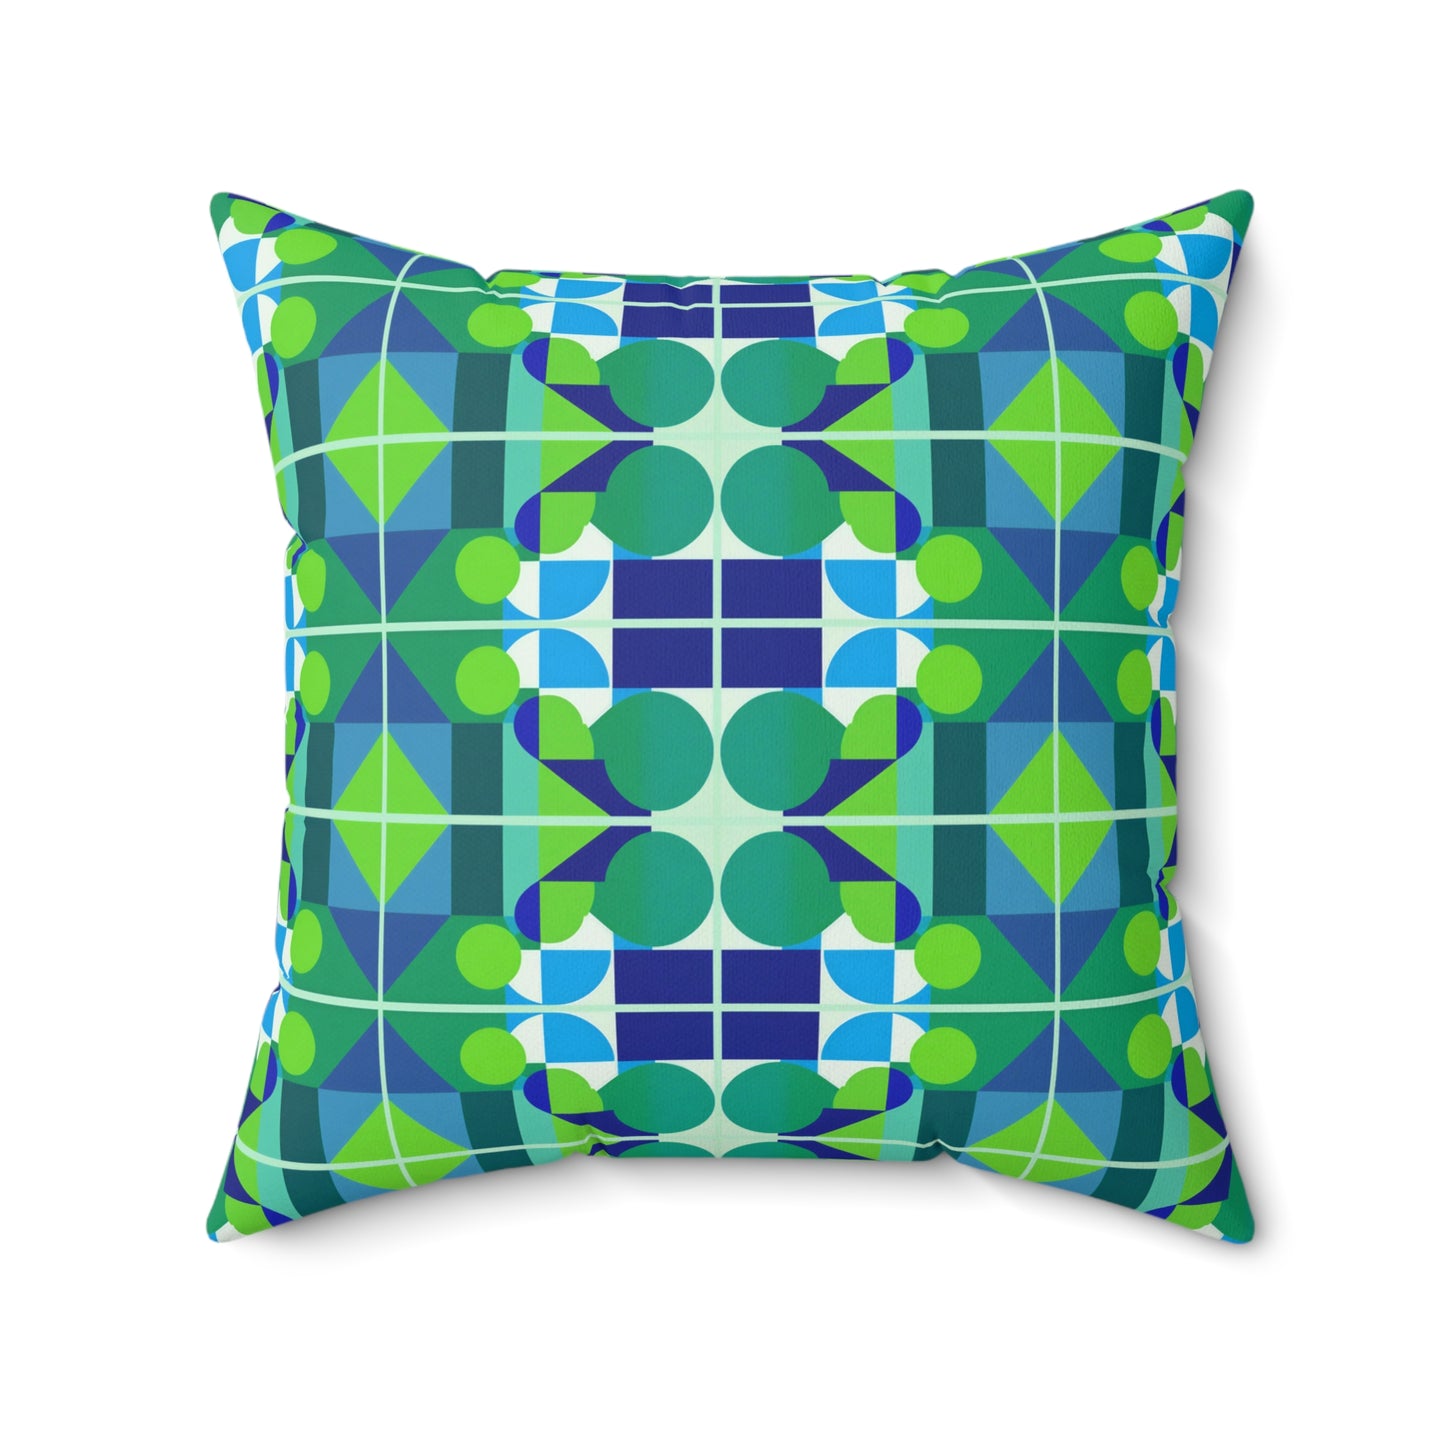 Mid Century Modern Blue and Green Abstract Geometric Pop Art Square Pillow